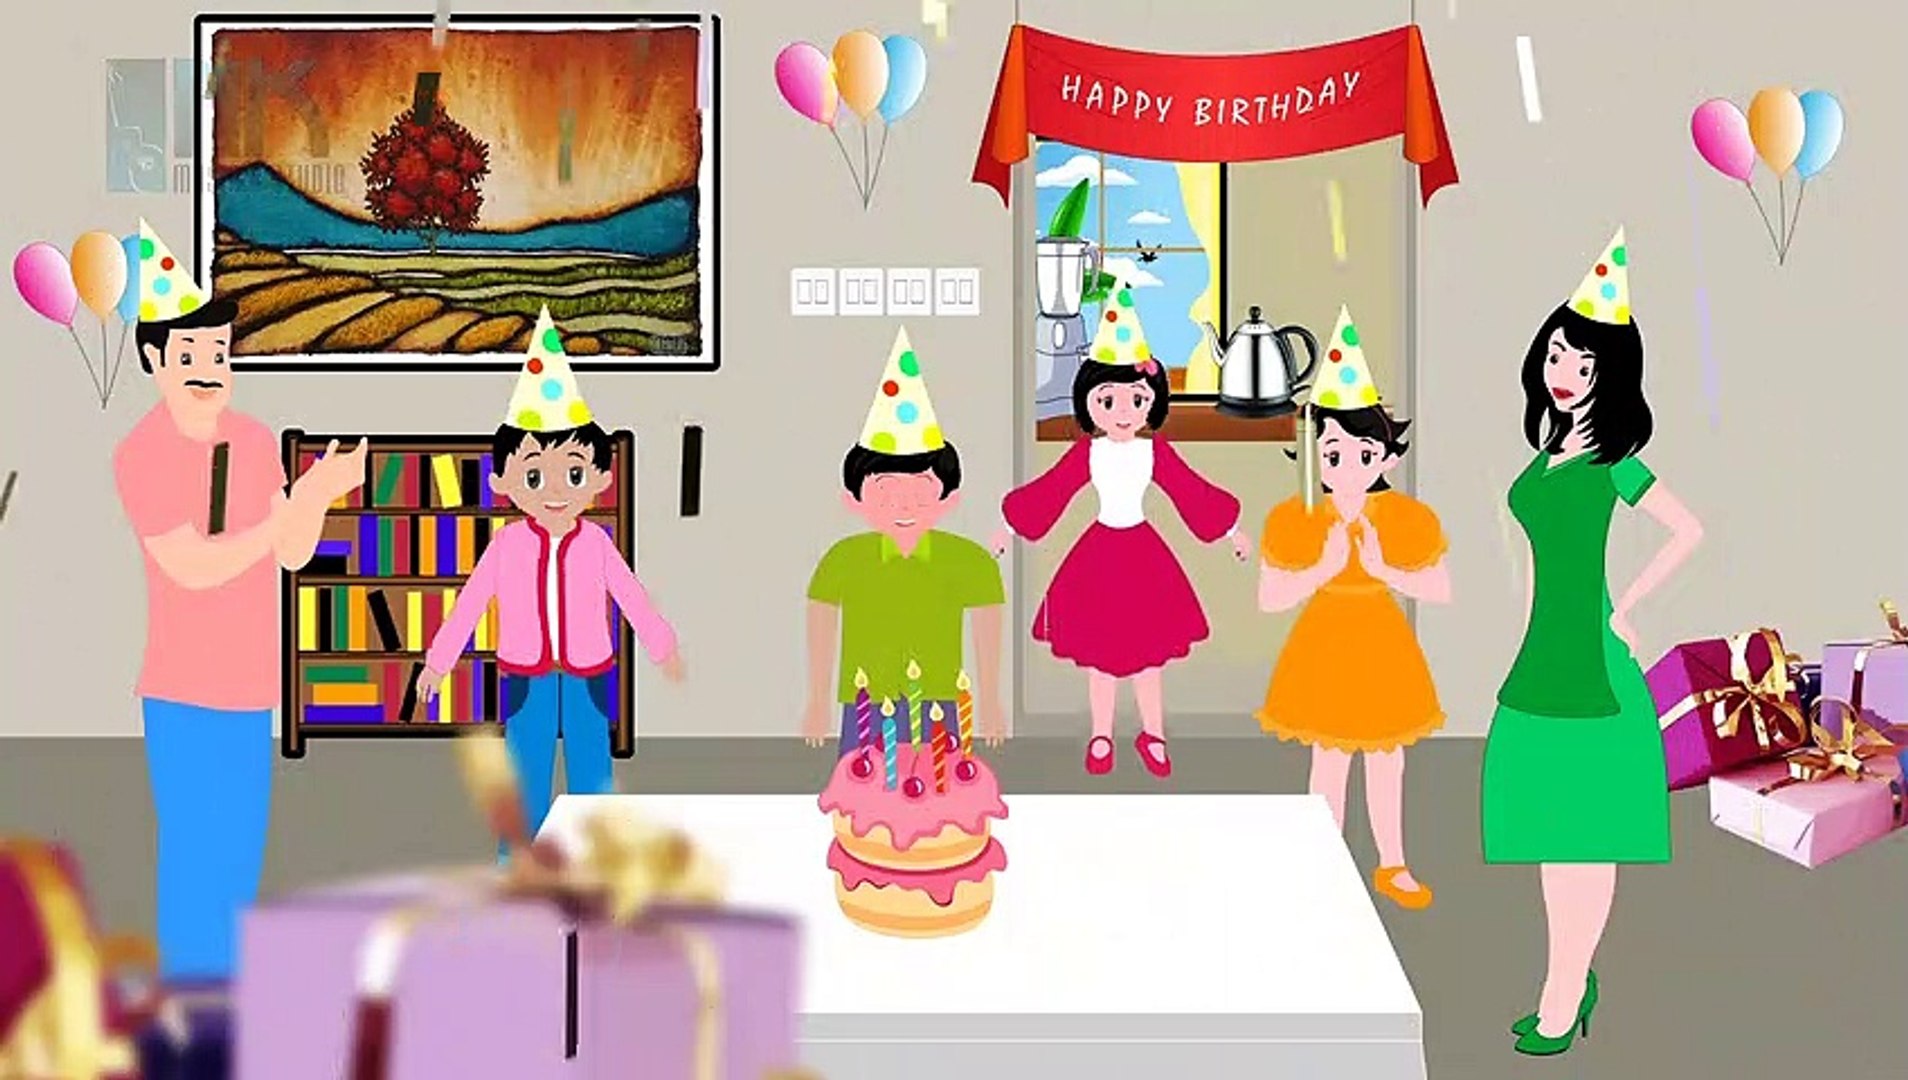 Happy Birthday Song - Nursery Rhymes For Kids - Cartoon Animation For  Children - video Dailymotion